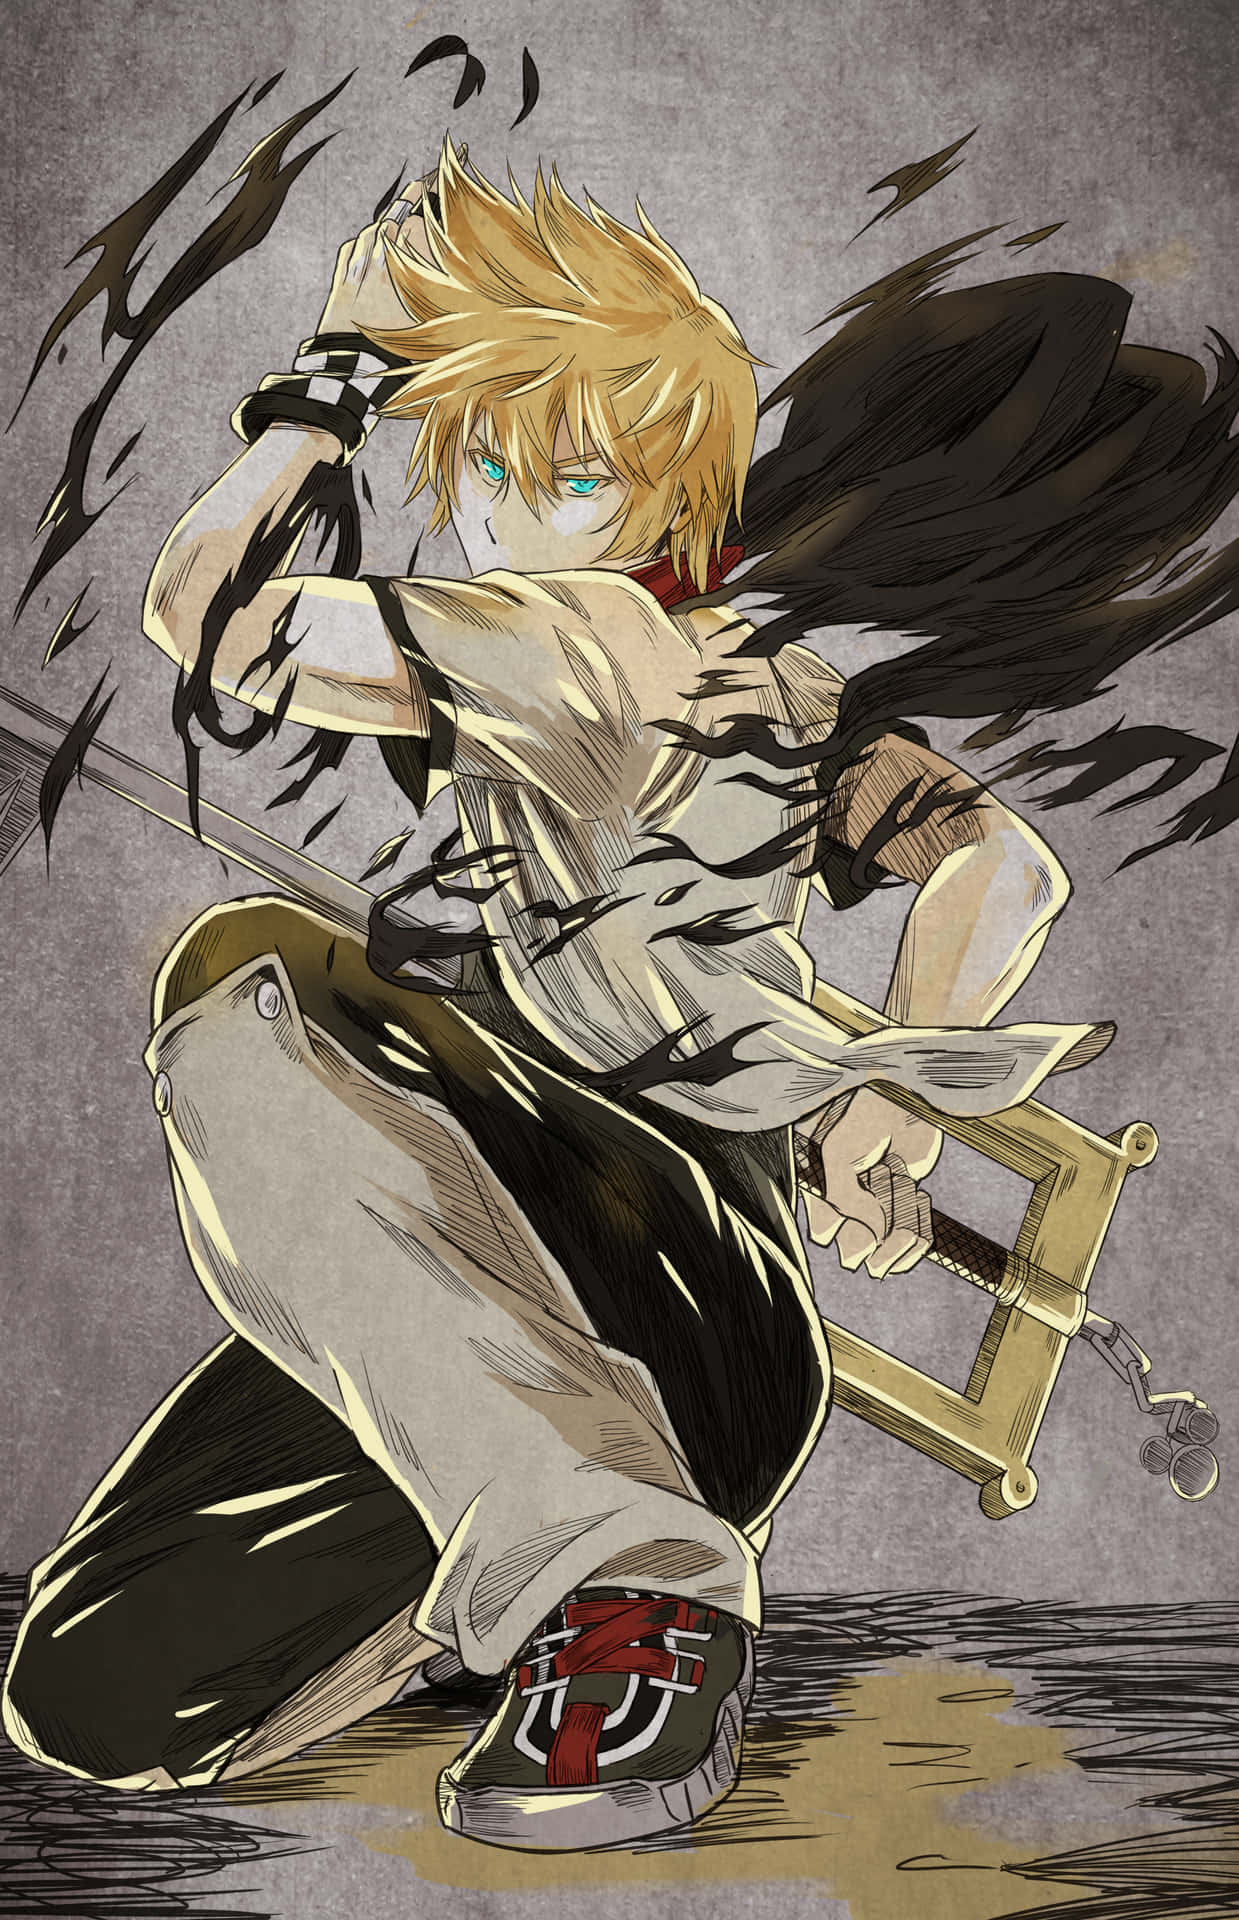 "Roxas in full power ready to bring justice to Kingdom Hearts." Wallpaper